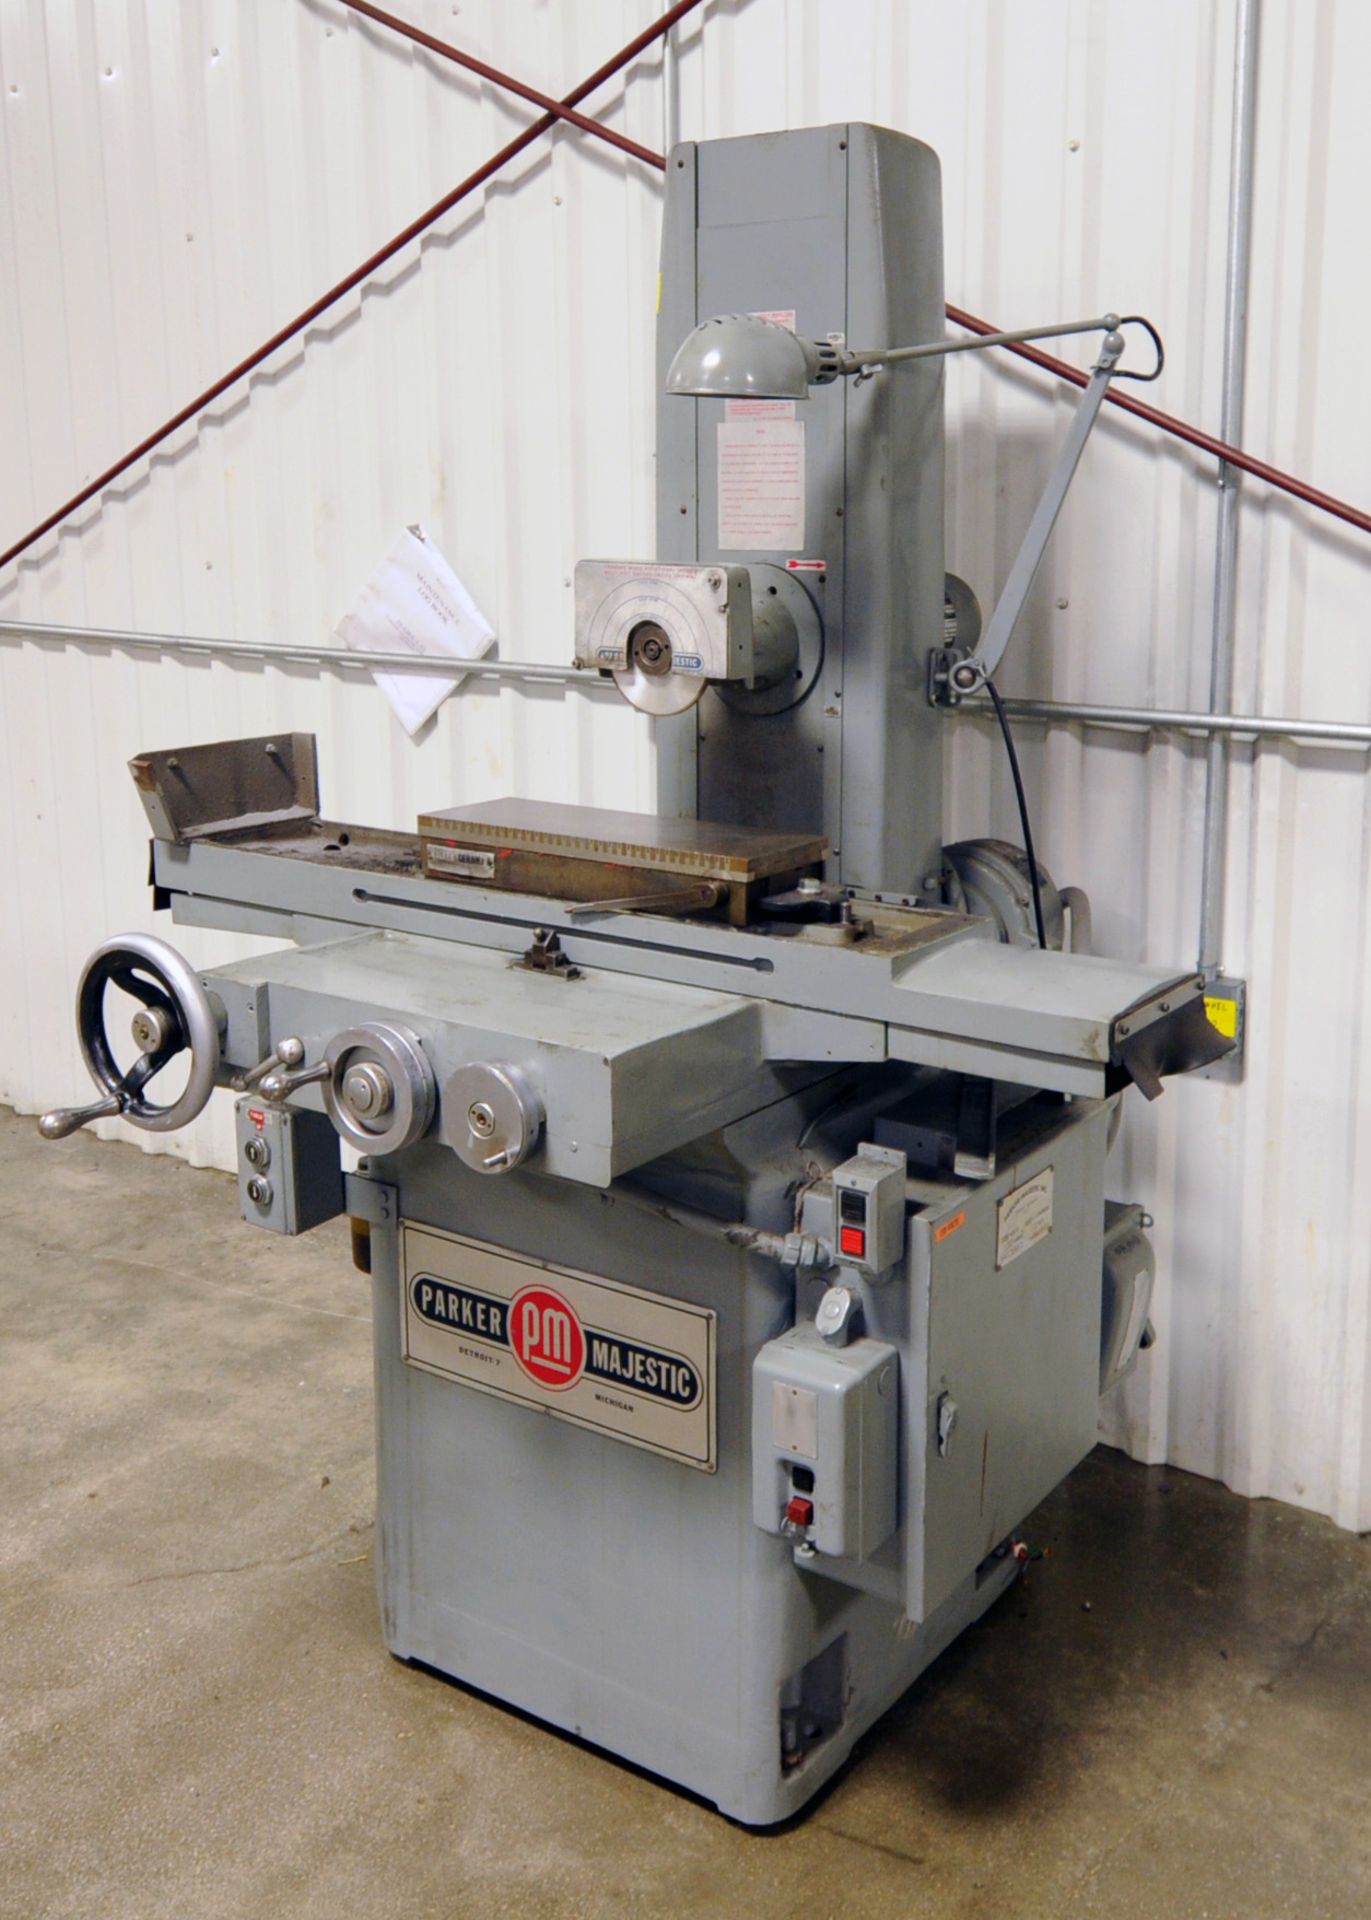 HAND FEED SURFACE GRINDER, PARKER MAJESTIC 6” X 18”, Walker 6” x 18” perm. magnetic chuck, 1 HP